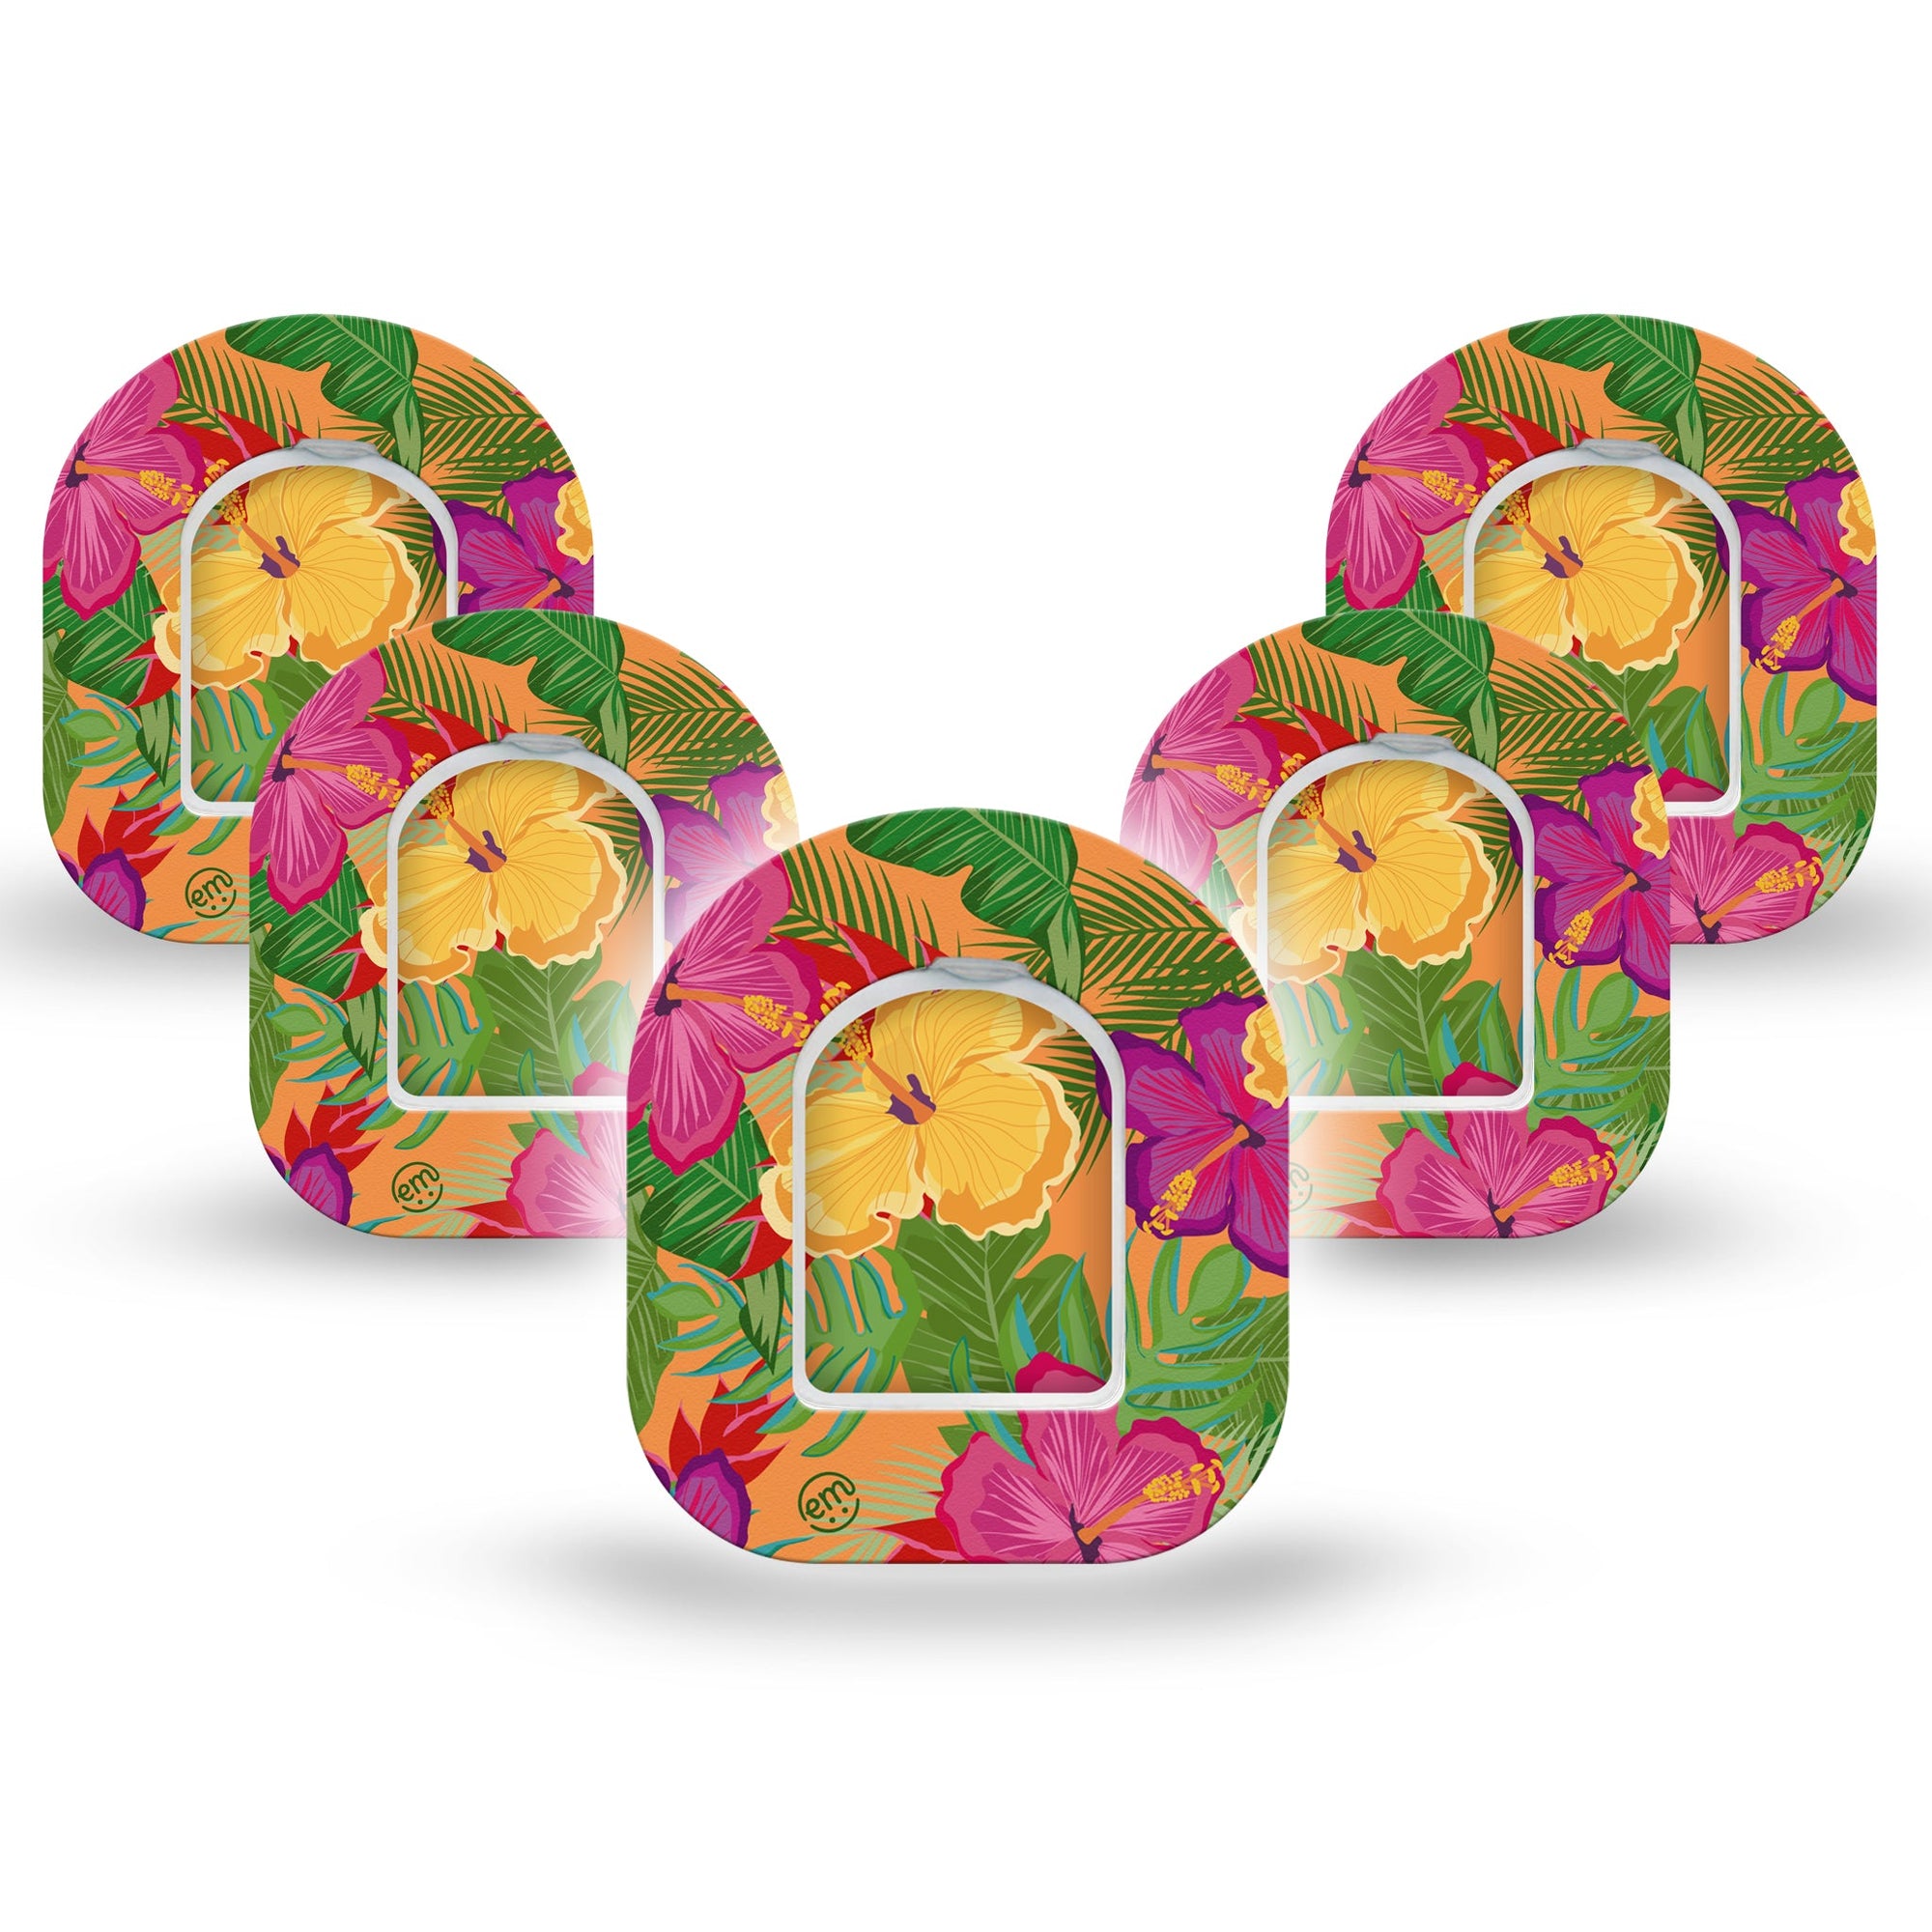 ExpressionMed Bright Hibiscus Pod Mini Tape 5 Stickers and 5 Tapes, Hawaiian Charm Adhesive Patch Pump Design